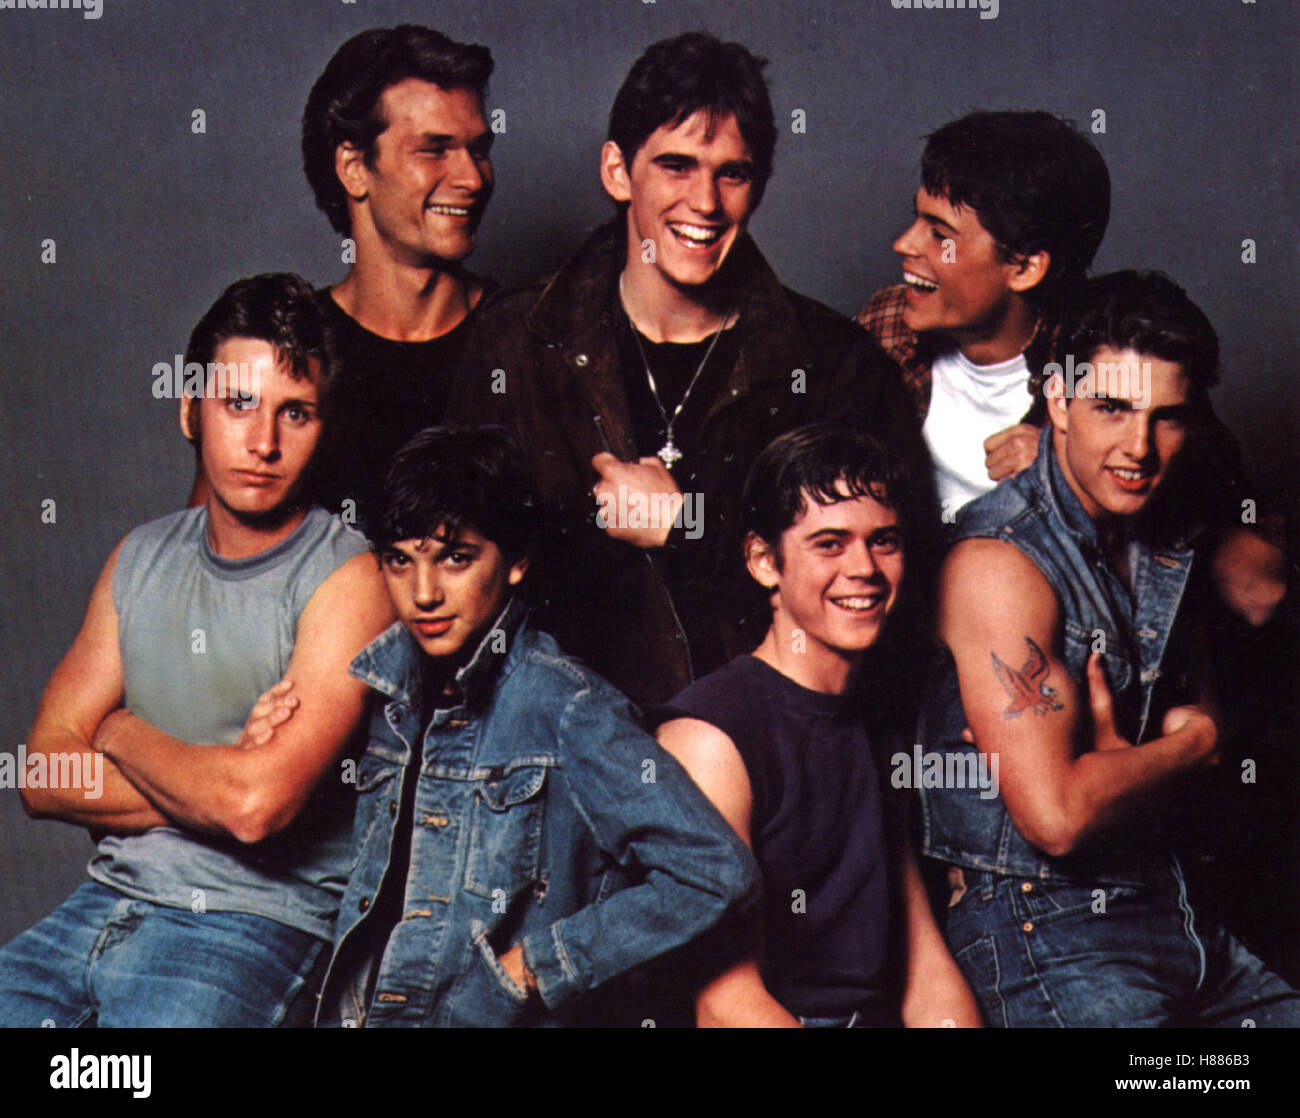 the outsiders movie tom cruise